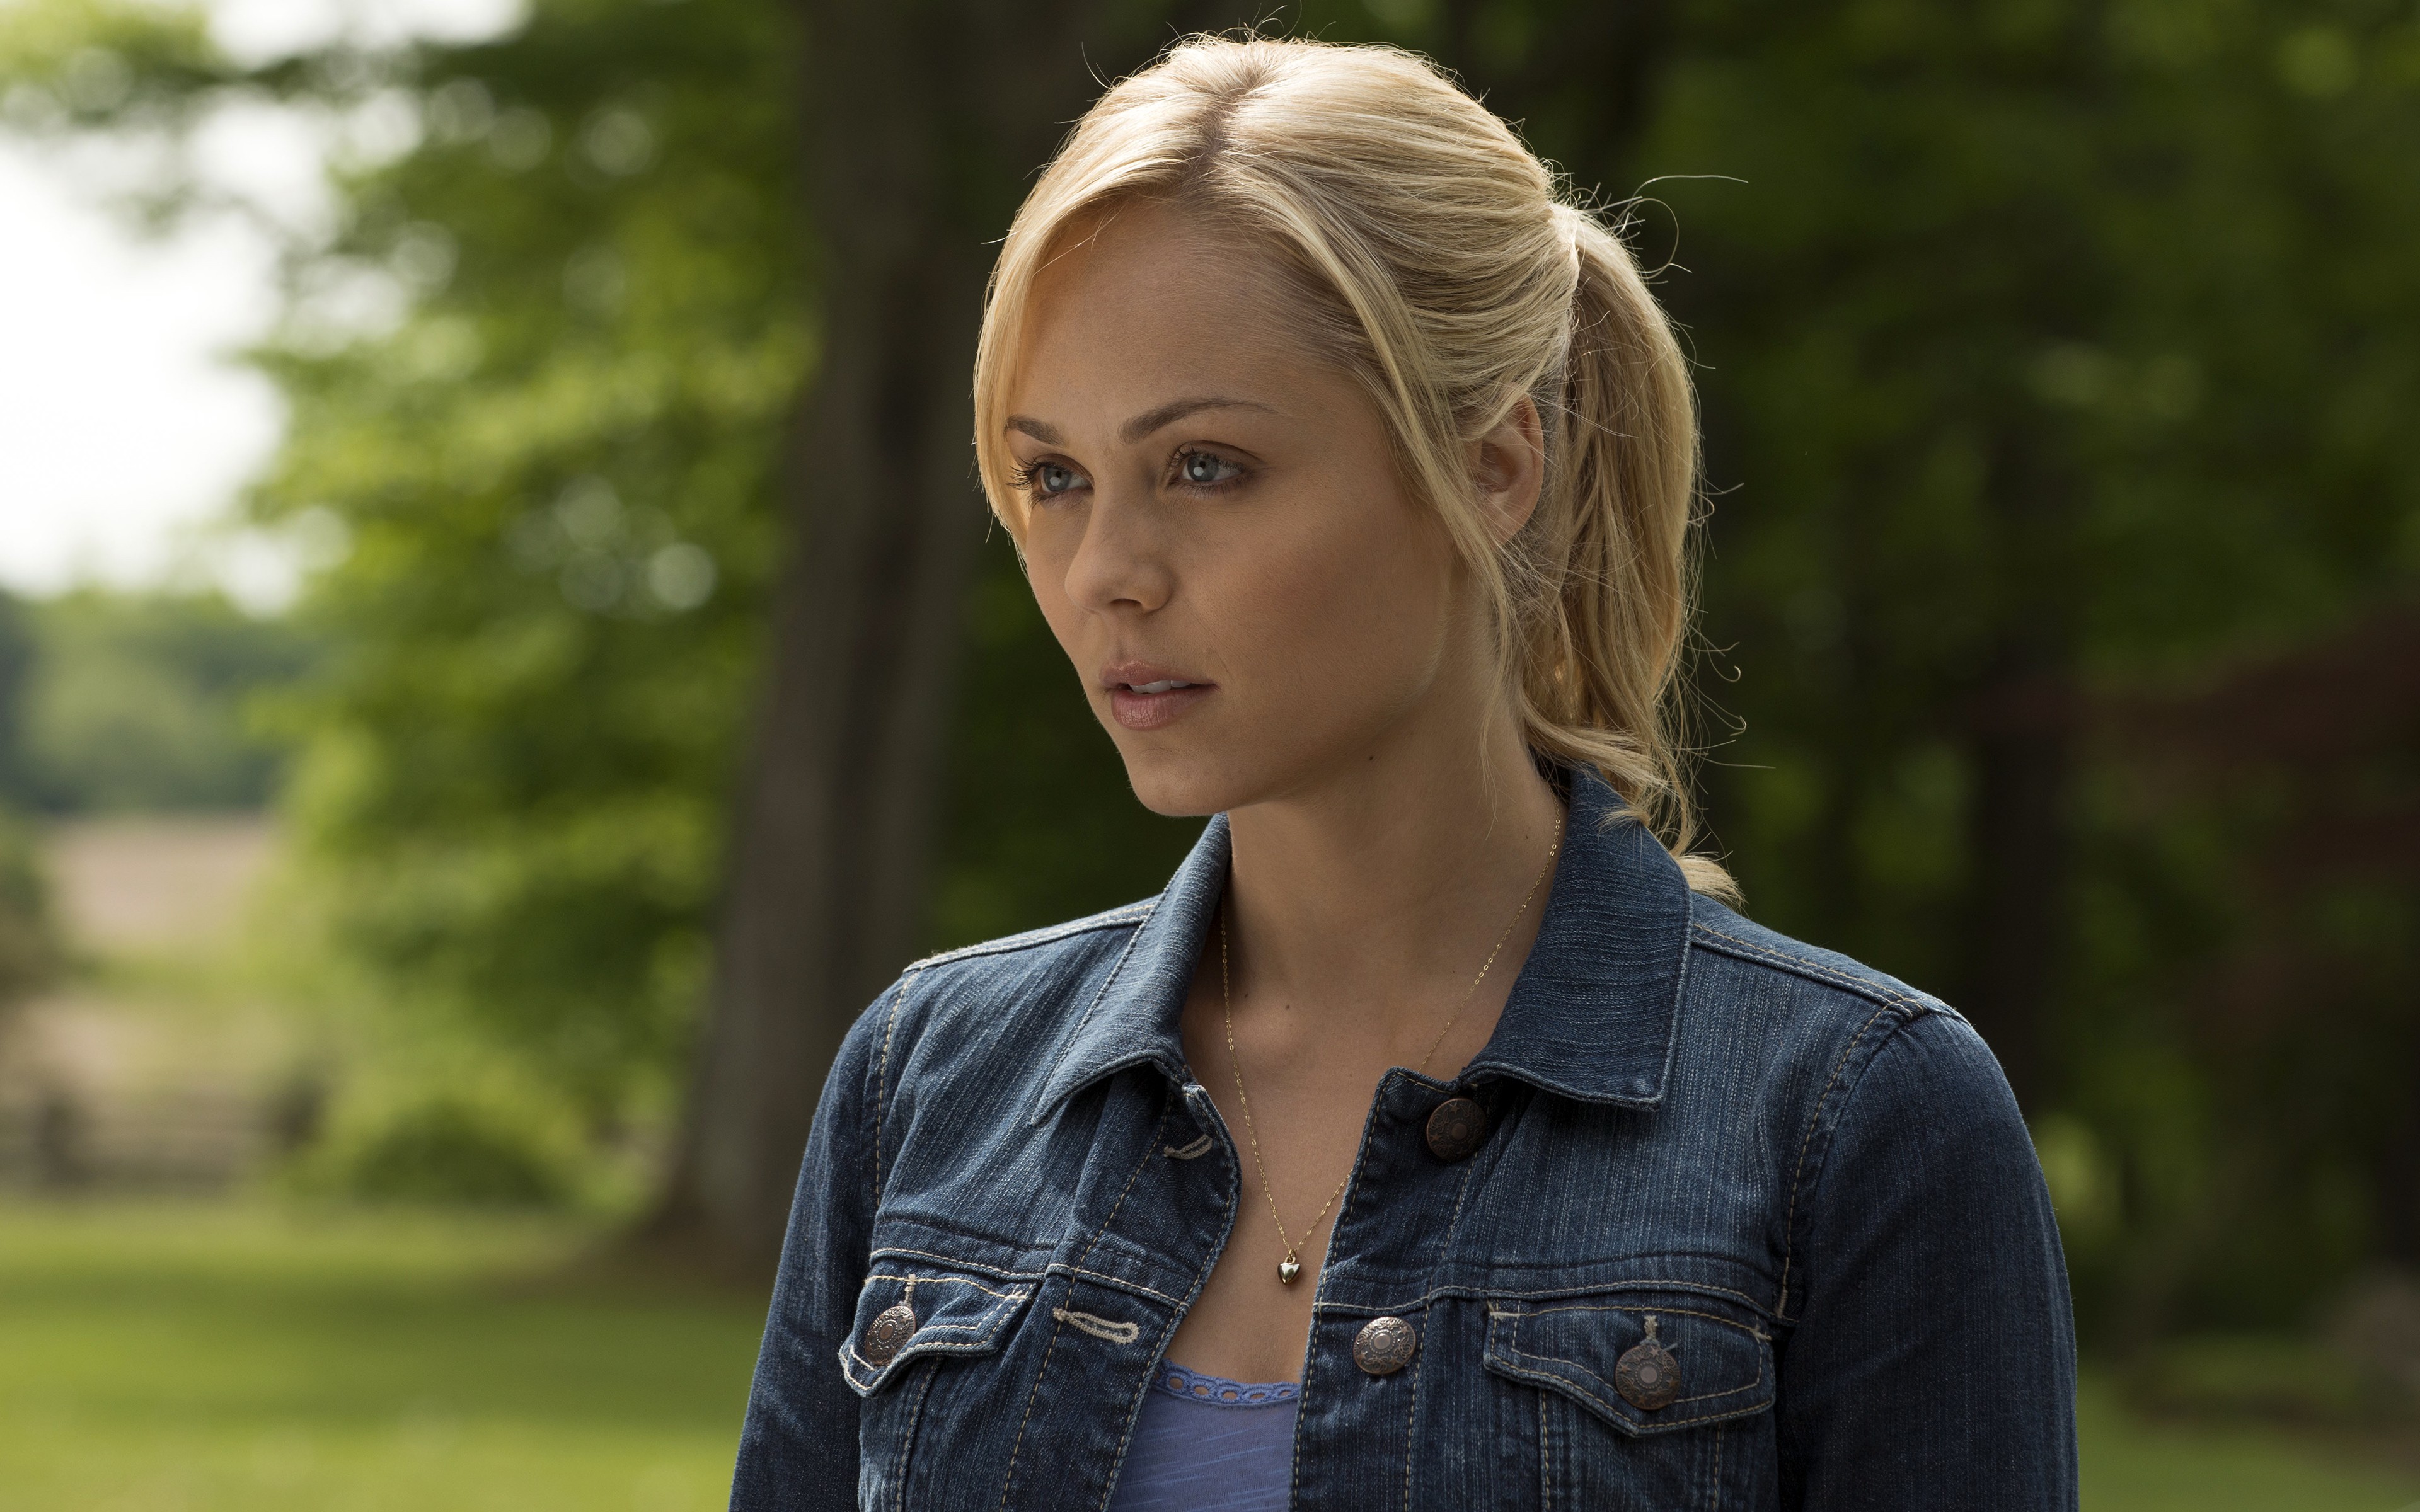 Laura Vandervoort Actress Blonde Celebrity Women Jeans Jacket Ponytail Necklace Looking Into The Dis 3840x2400